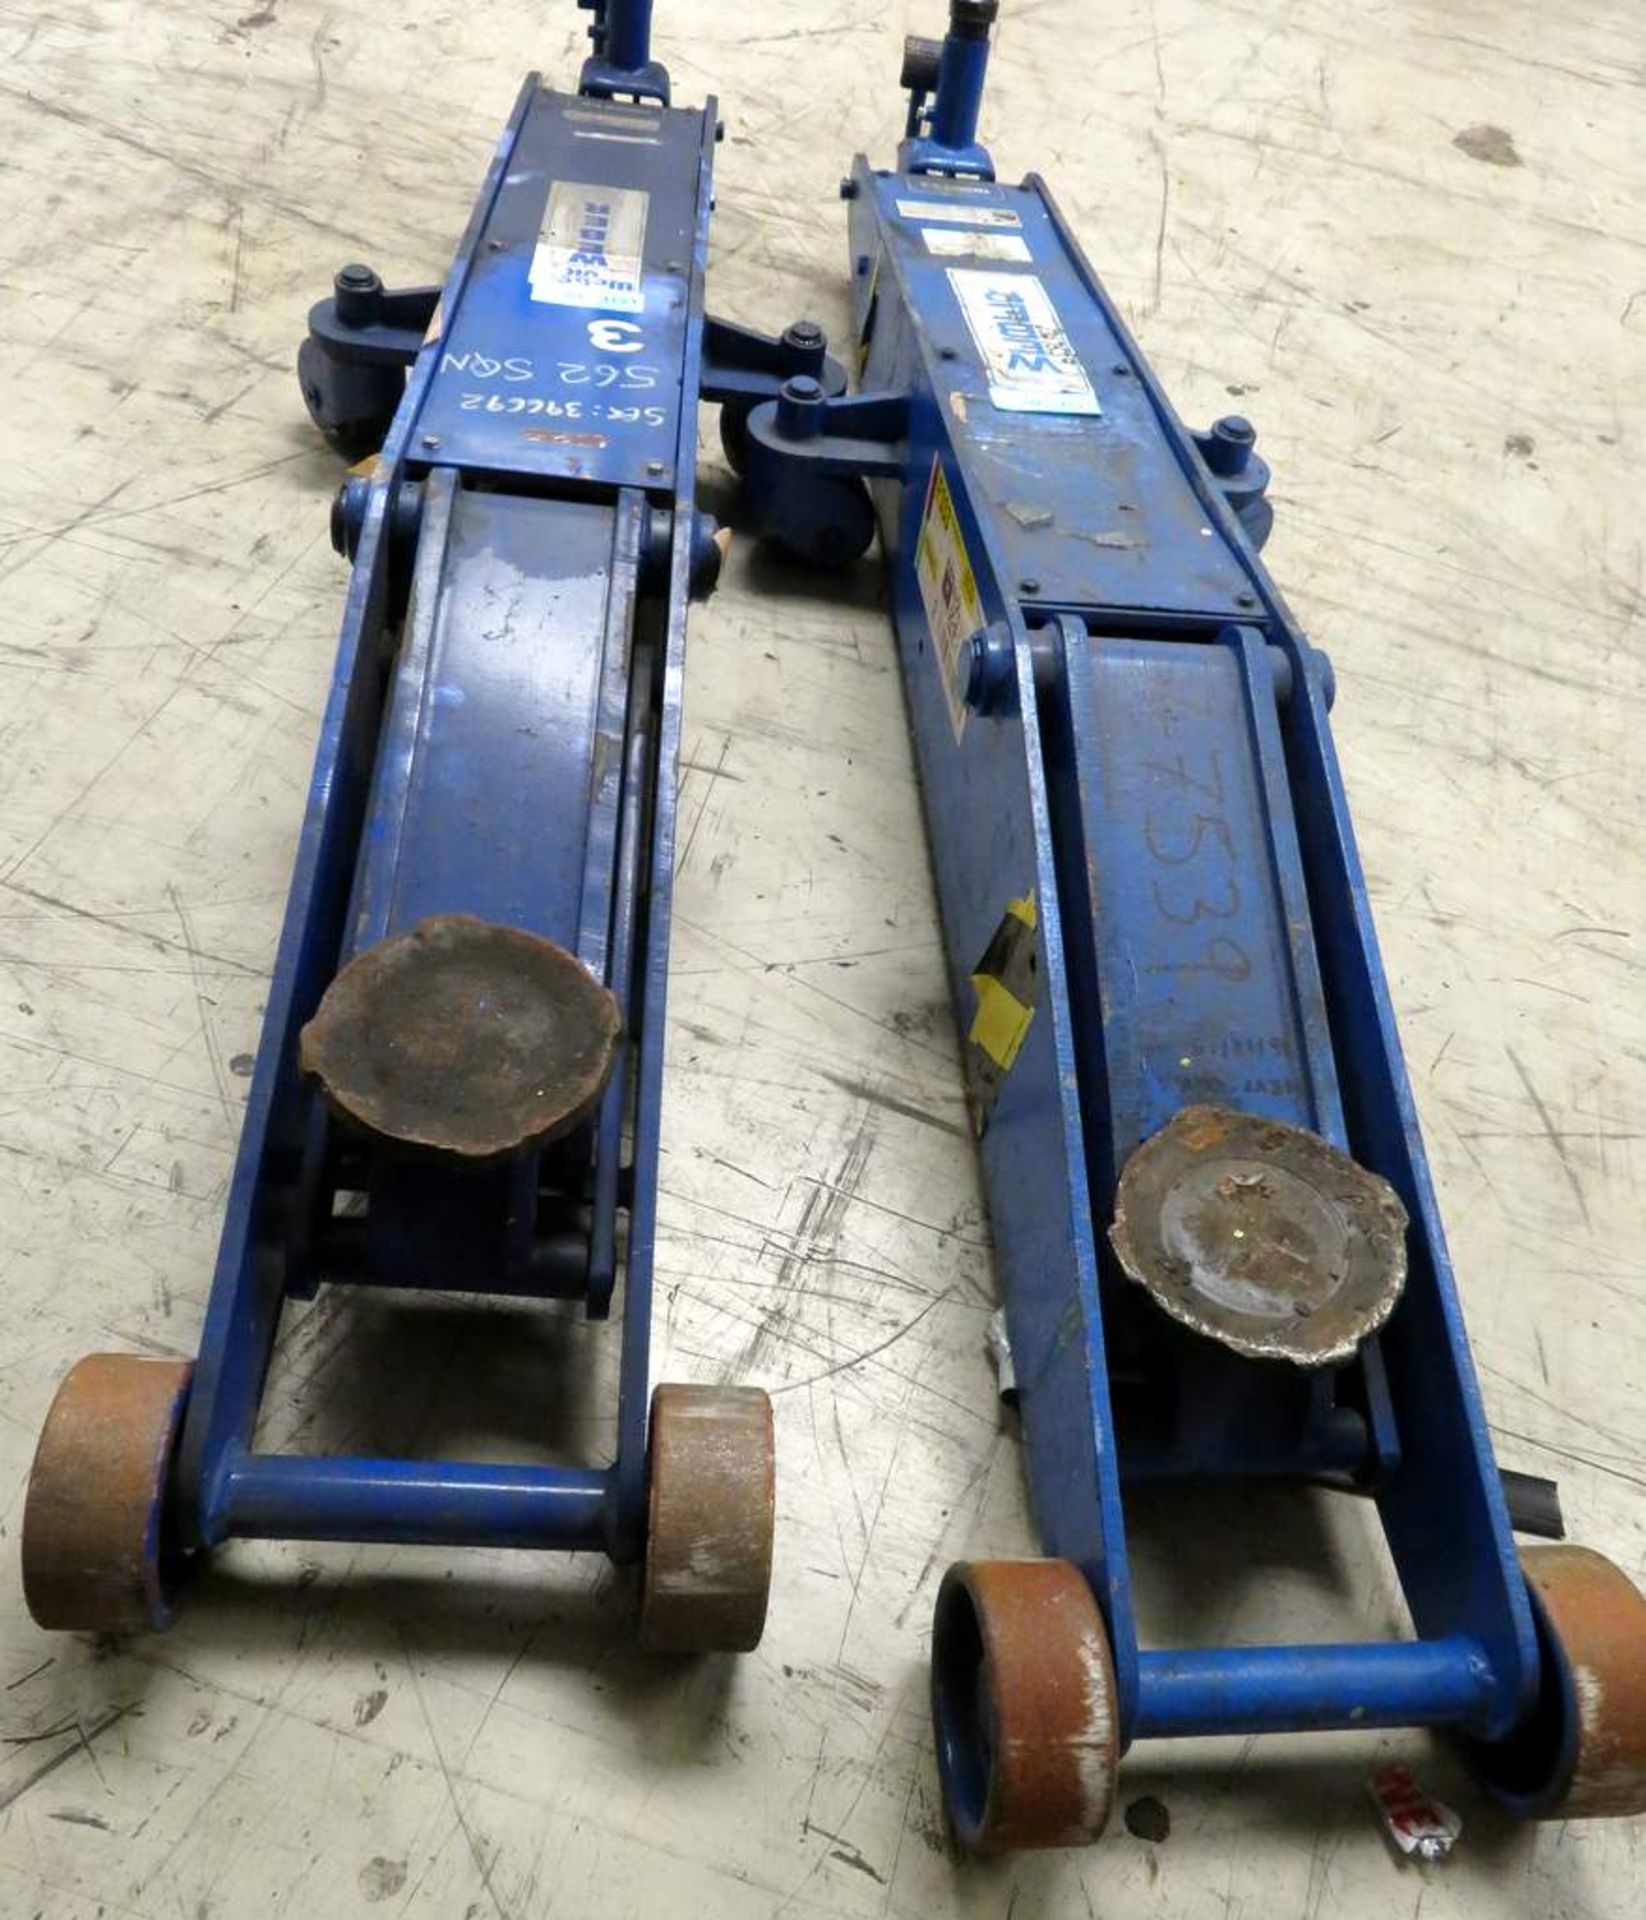 2x Weber 10 Tonne Vehicle Trolley Jacks Complete With Handle - WDK100LQ - Working Condition - Image 6 of 8